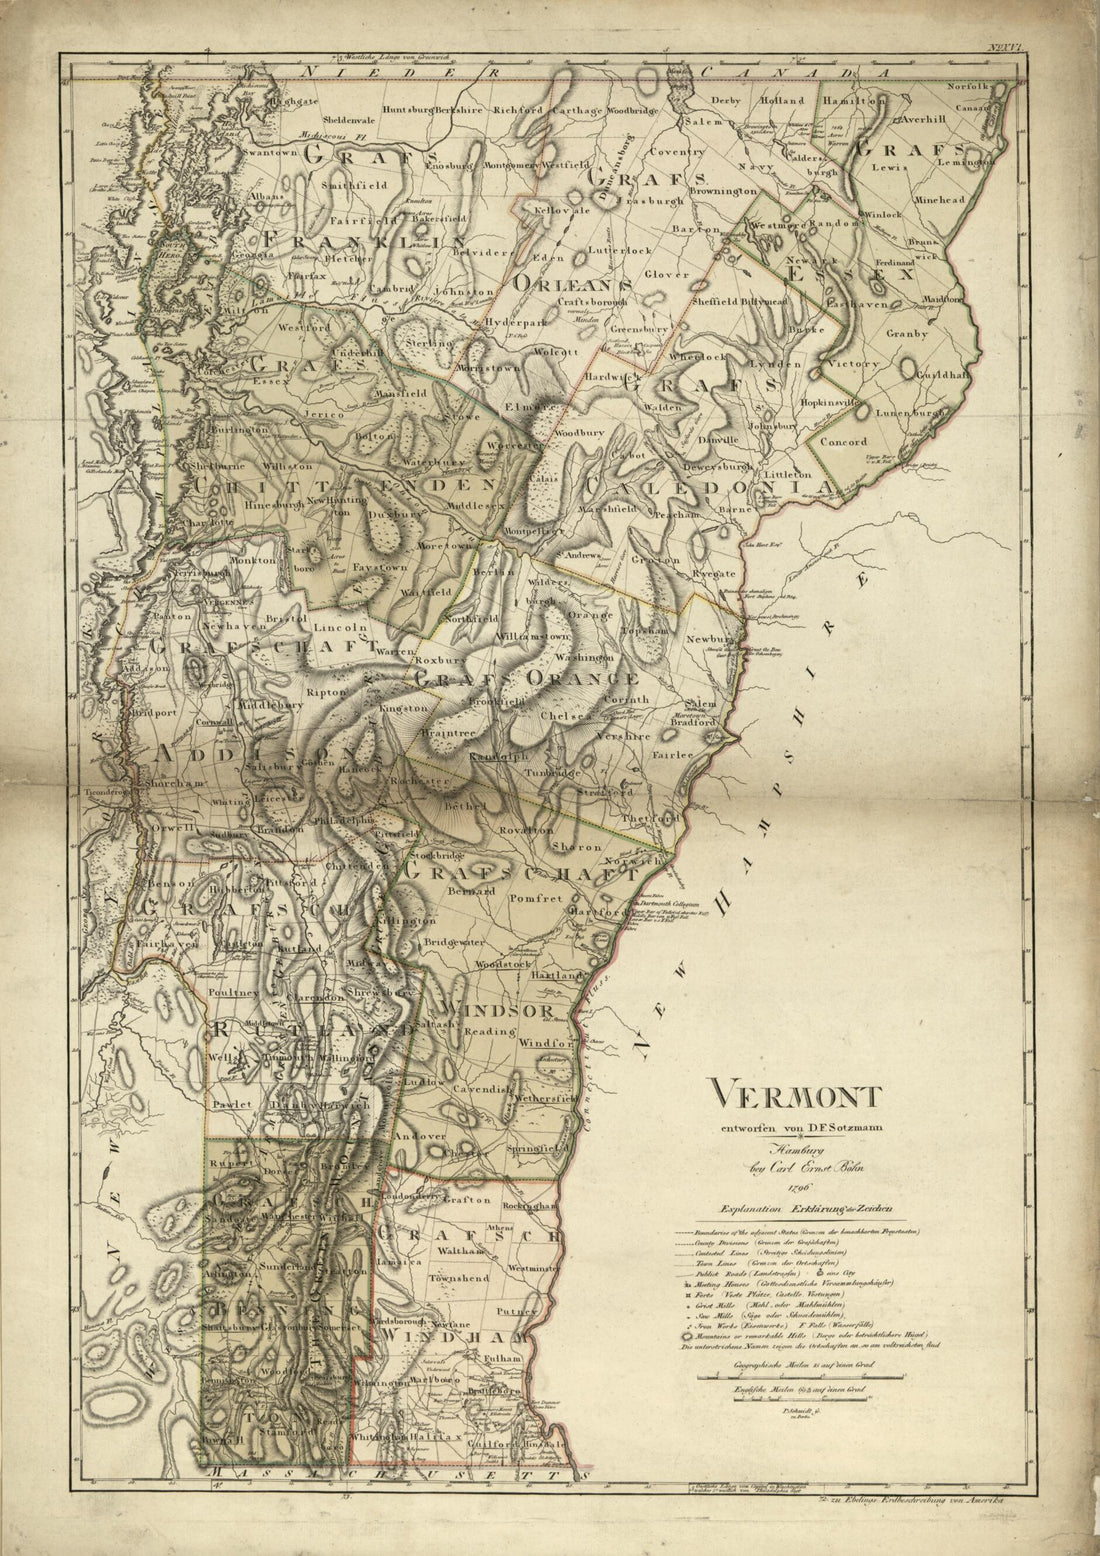 This old map of Vermont from 1796 was created by Carl Ernst Bohn, Paulus Schmidt, D. F. Sotzmann in 1796